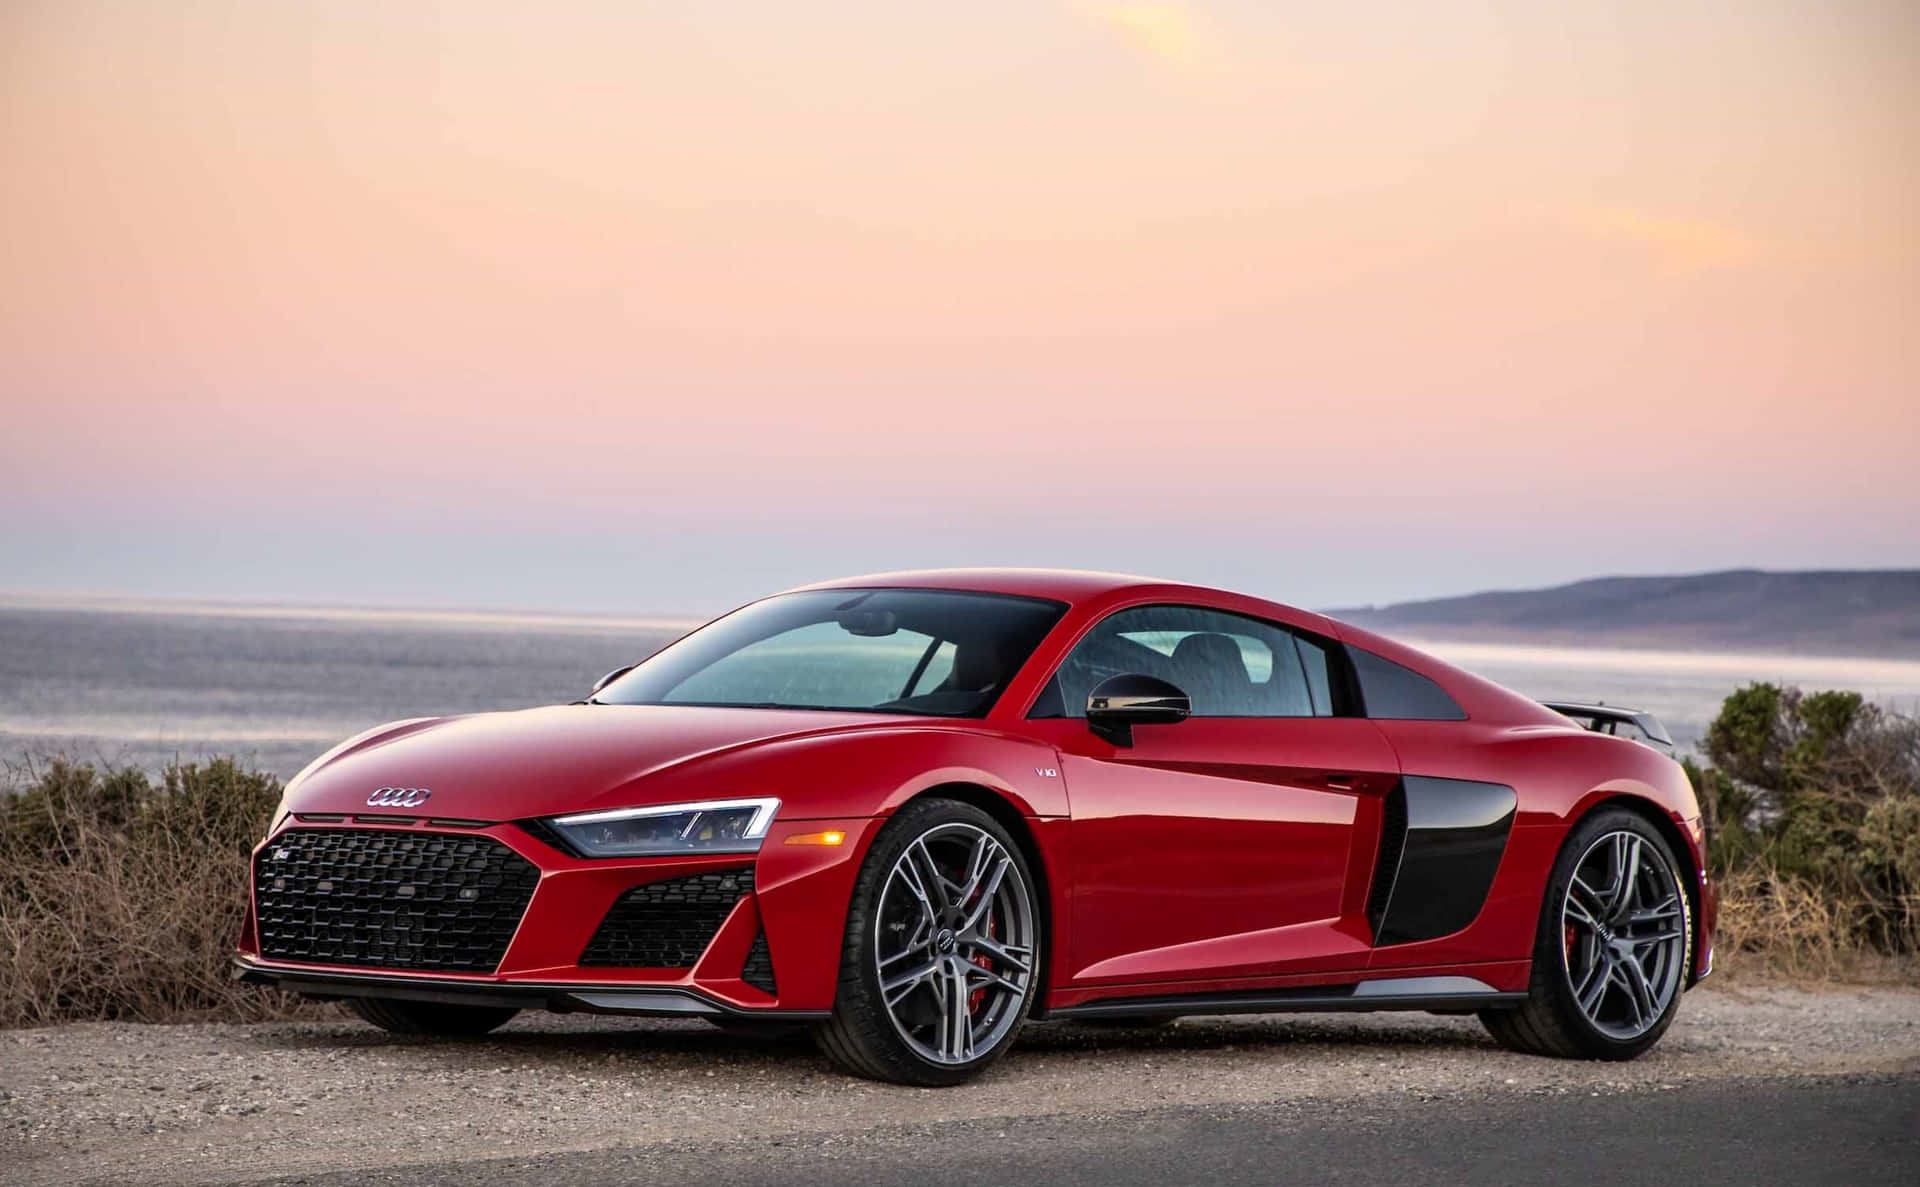 Get Ready to Feel the Incredible Speed of the Audi R8